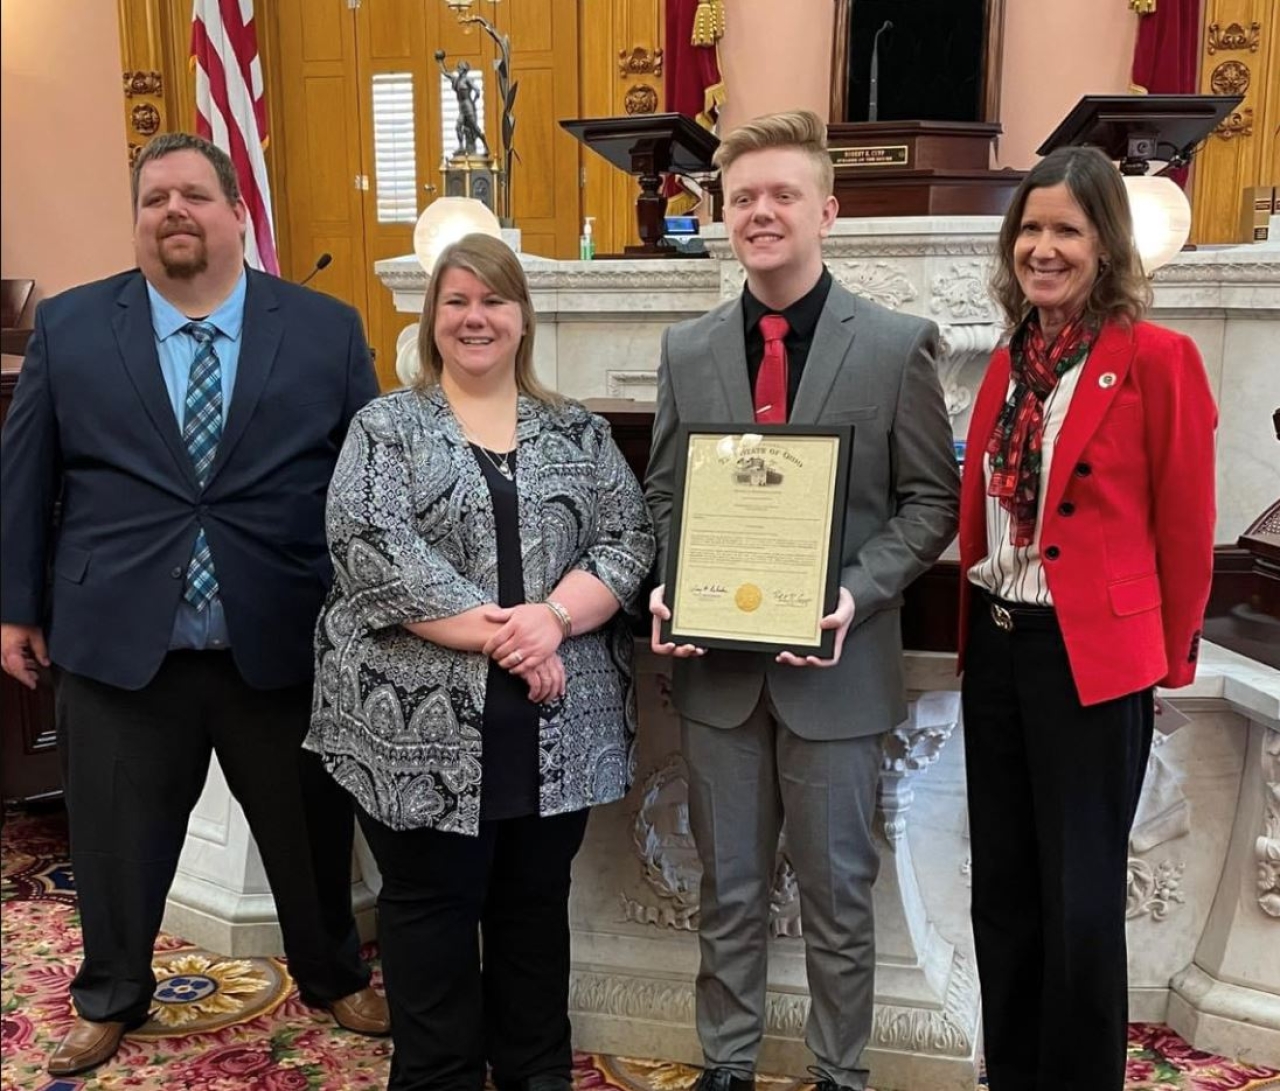 Representative Richardson was pleased to honor Jayden Combs for receiving the USA Today Ohio High School Sports Award for bowling.